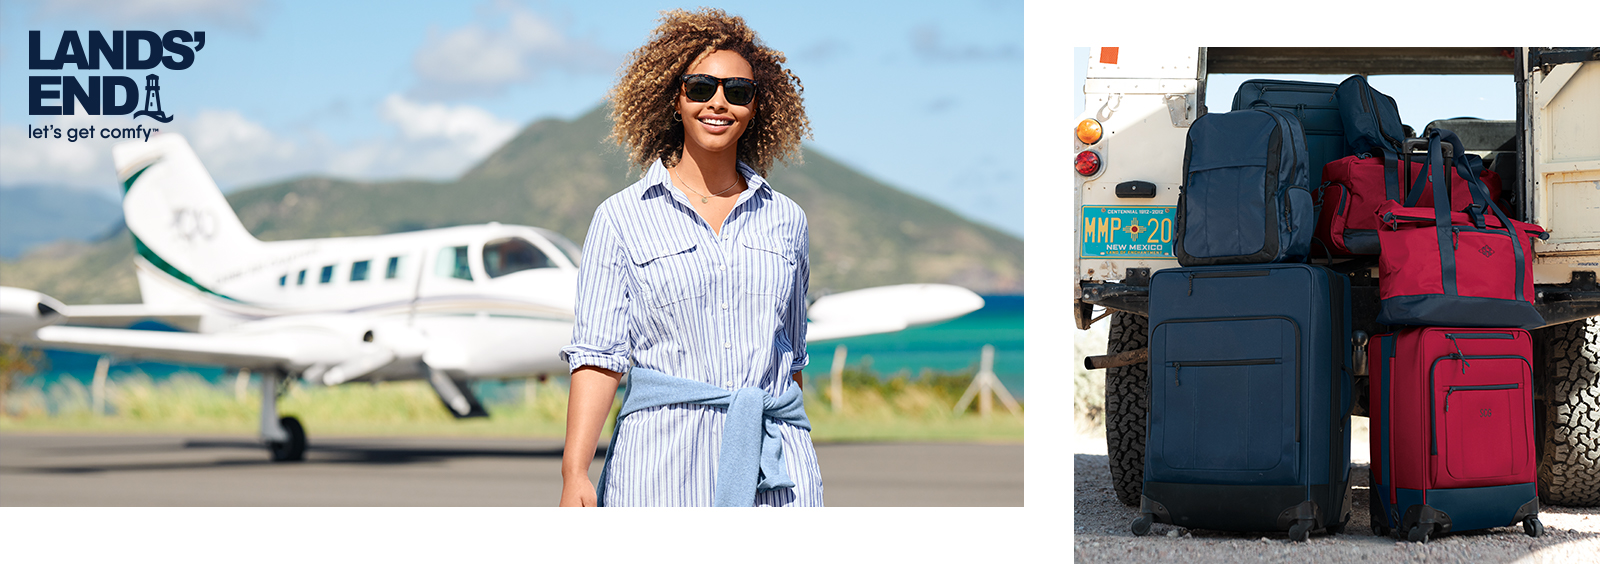 Airport Styles To Consider For Your Next Holiday Getaway